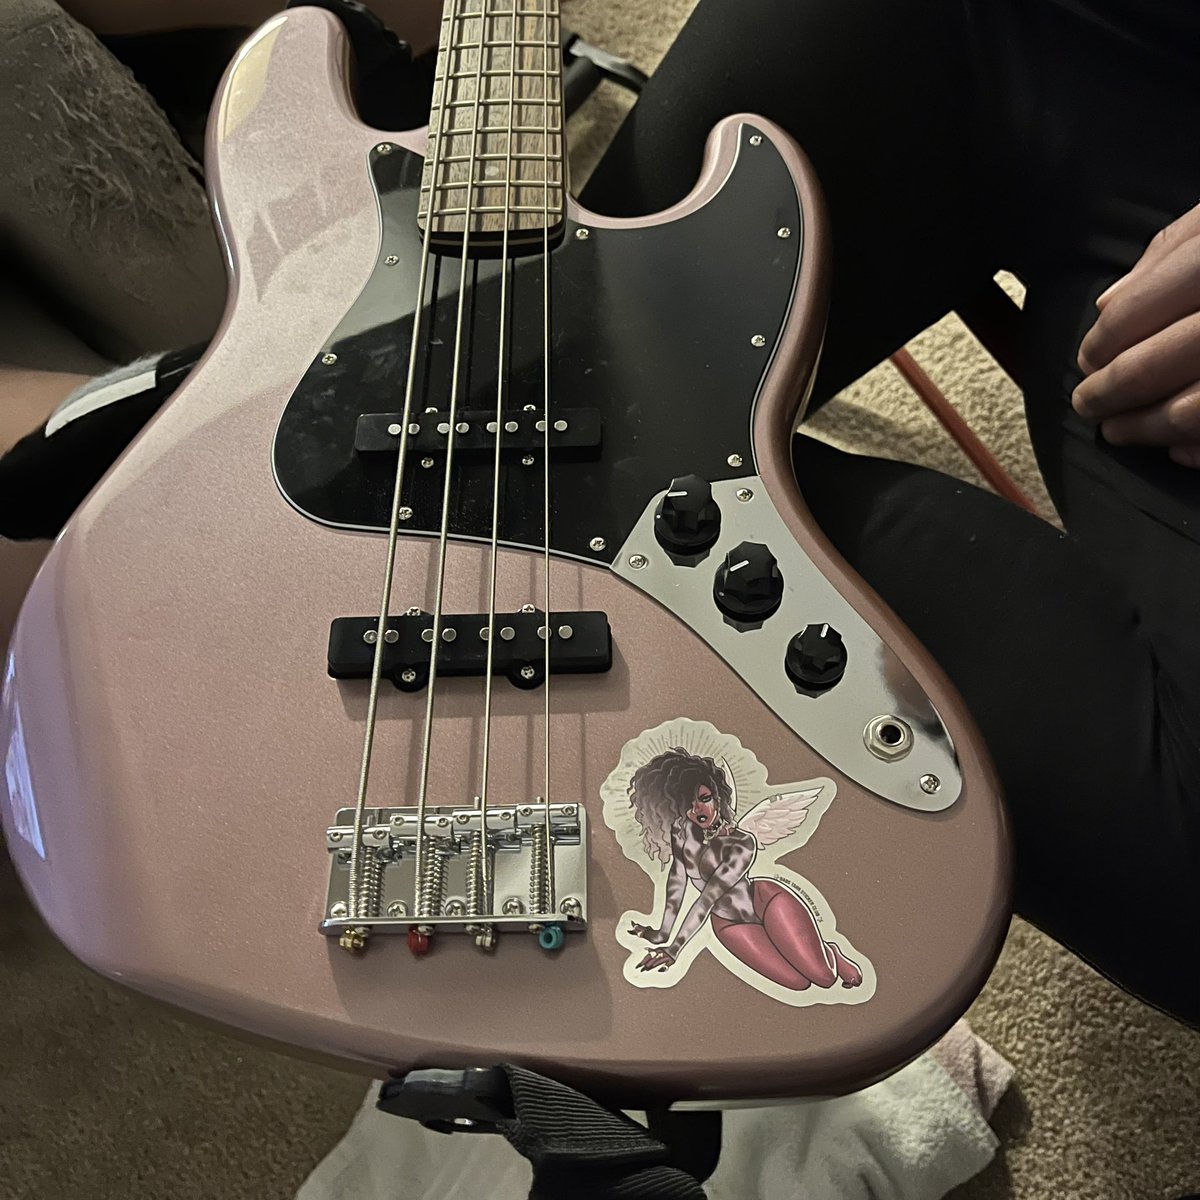 Spending NYE with my bestie. He got his gf a bass for Christmas and she added a sticker I gave em from @babsdraws